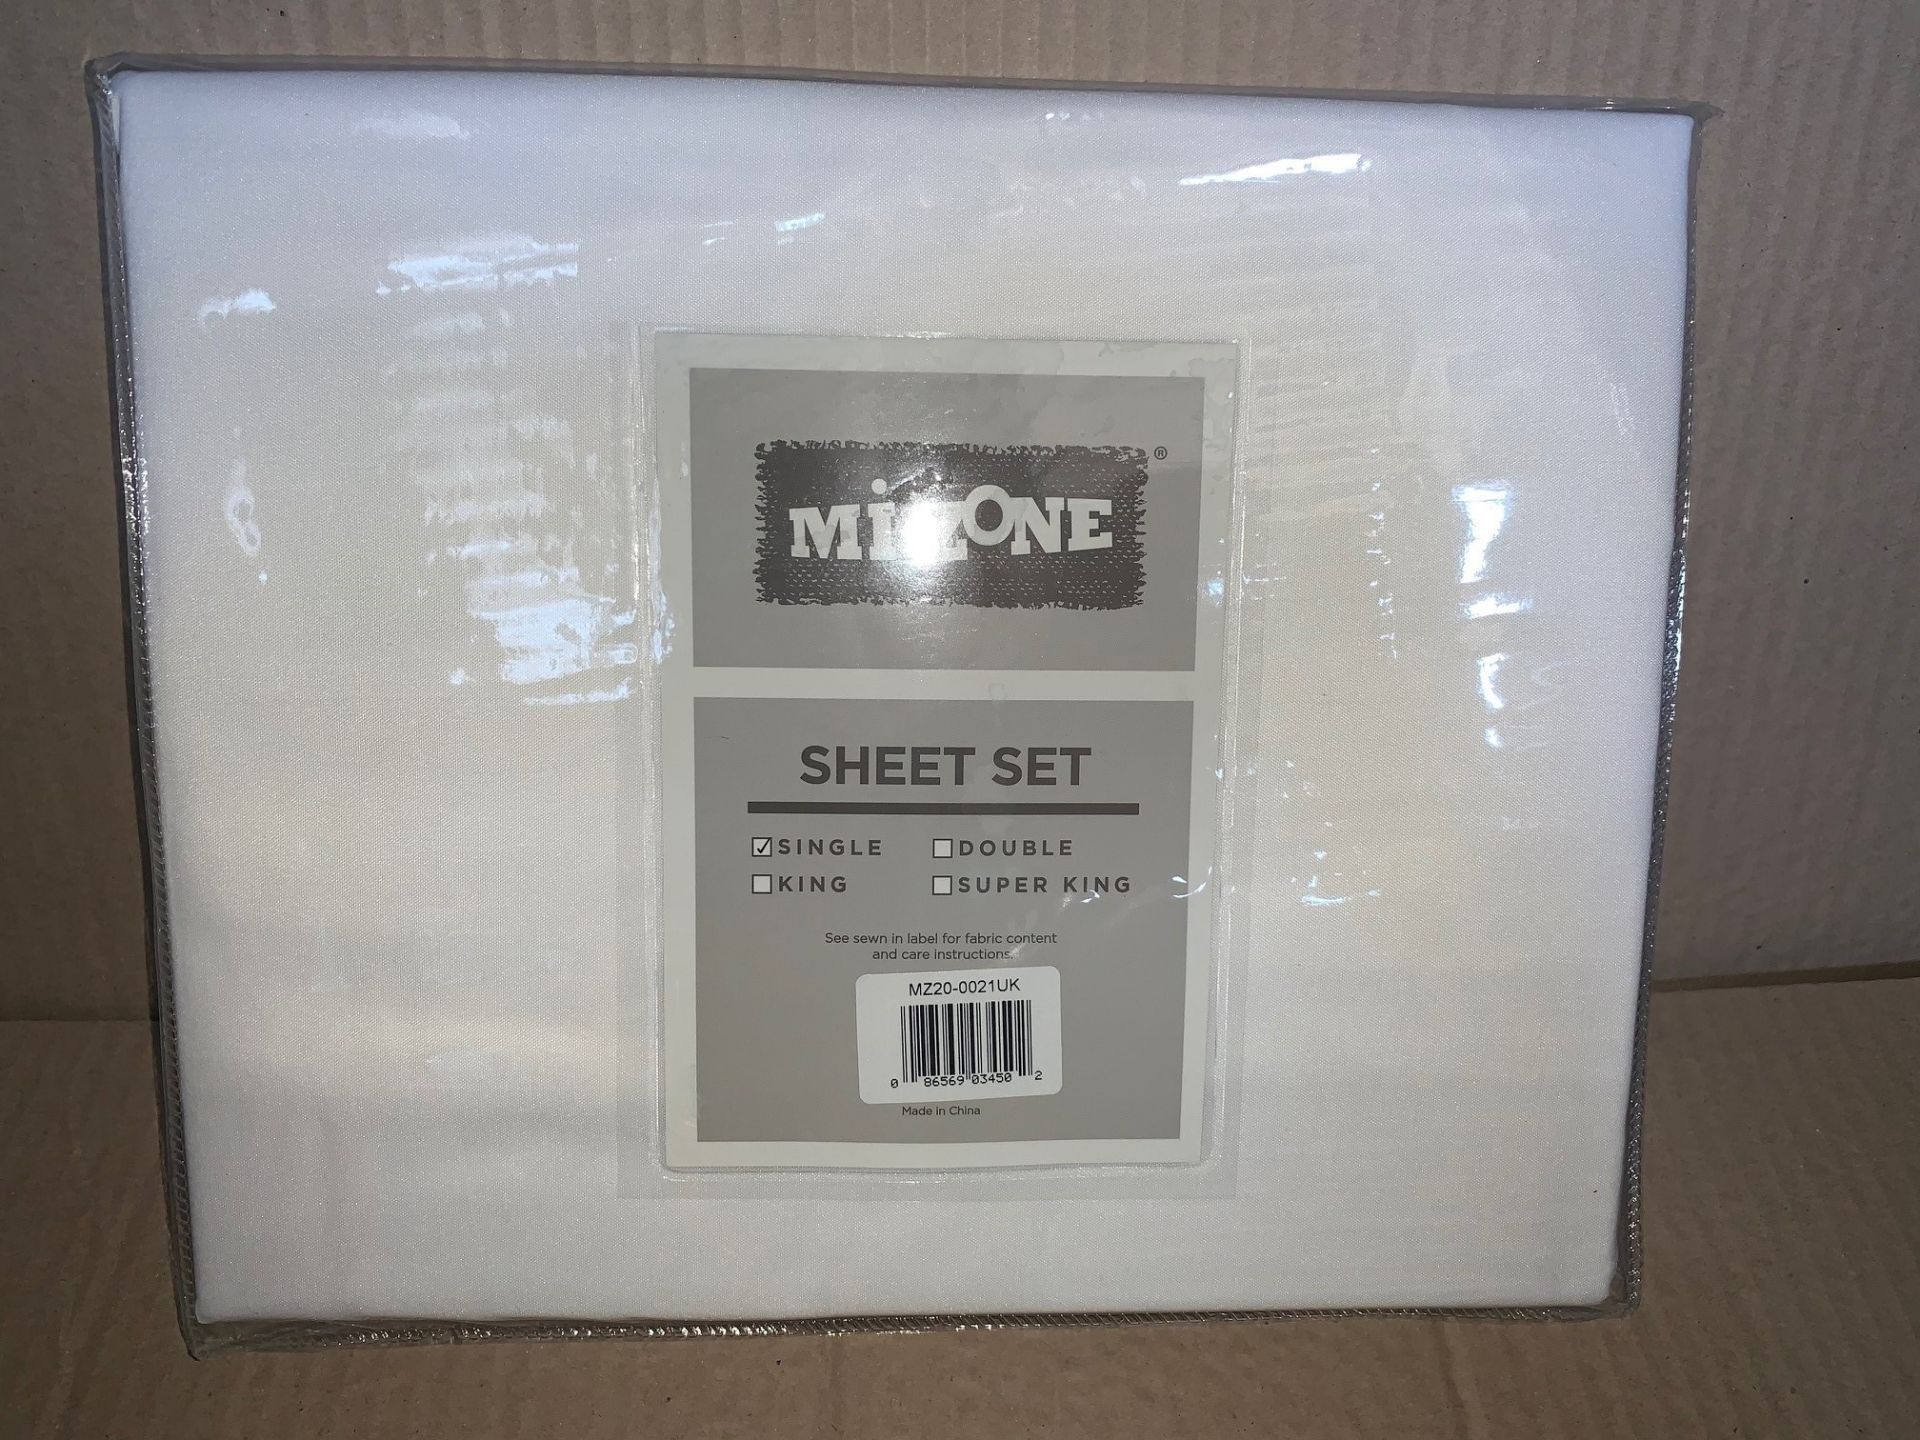 1 x Mi-Zone Single Sheet Set White - Includes Fitted Sheet, Flat Sheet and Pillowcases - Product